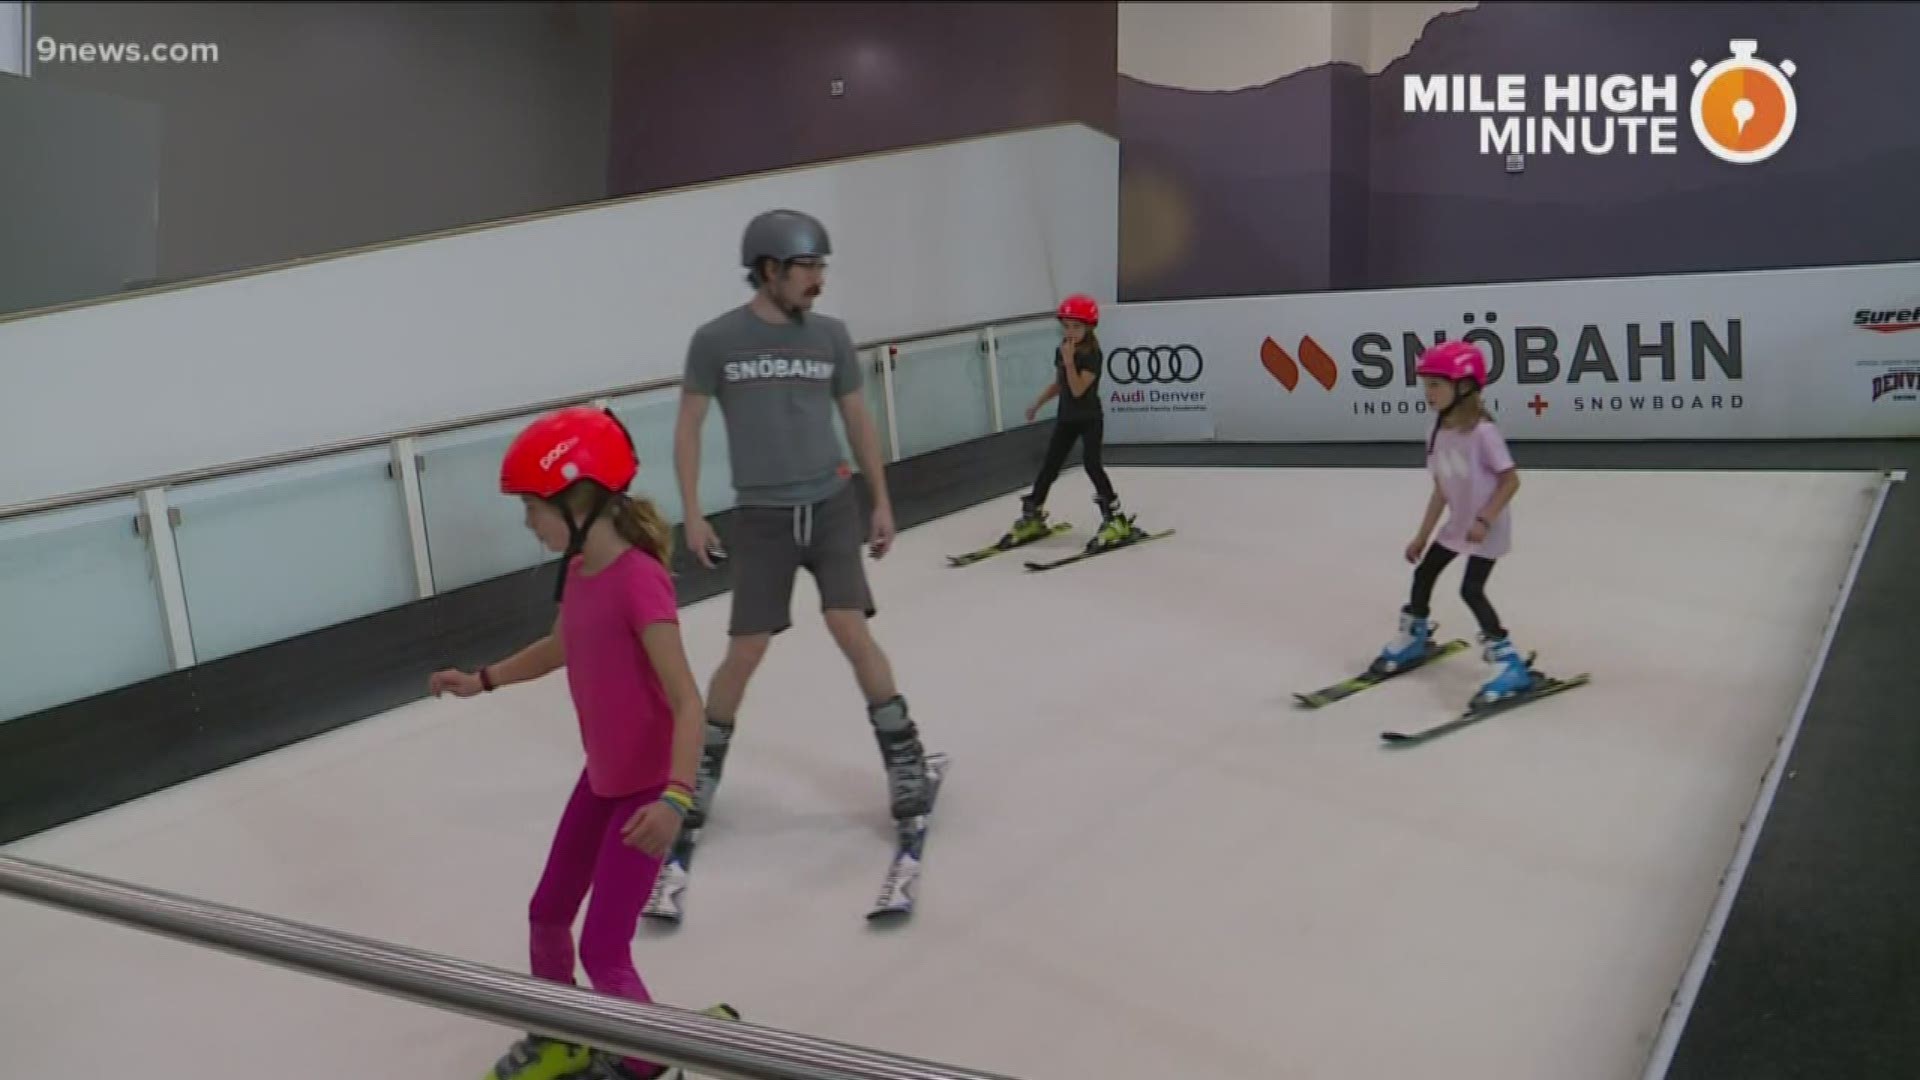 This local spot is helping newbies try out skiing and snowboarding without hitting the slopes.